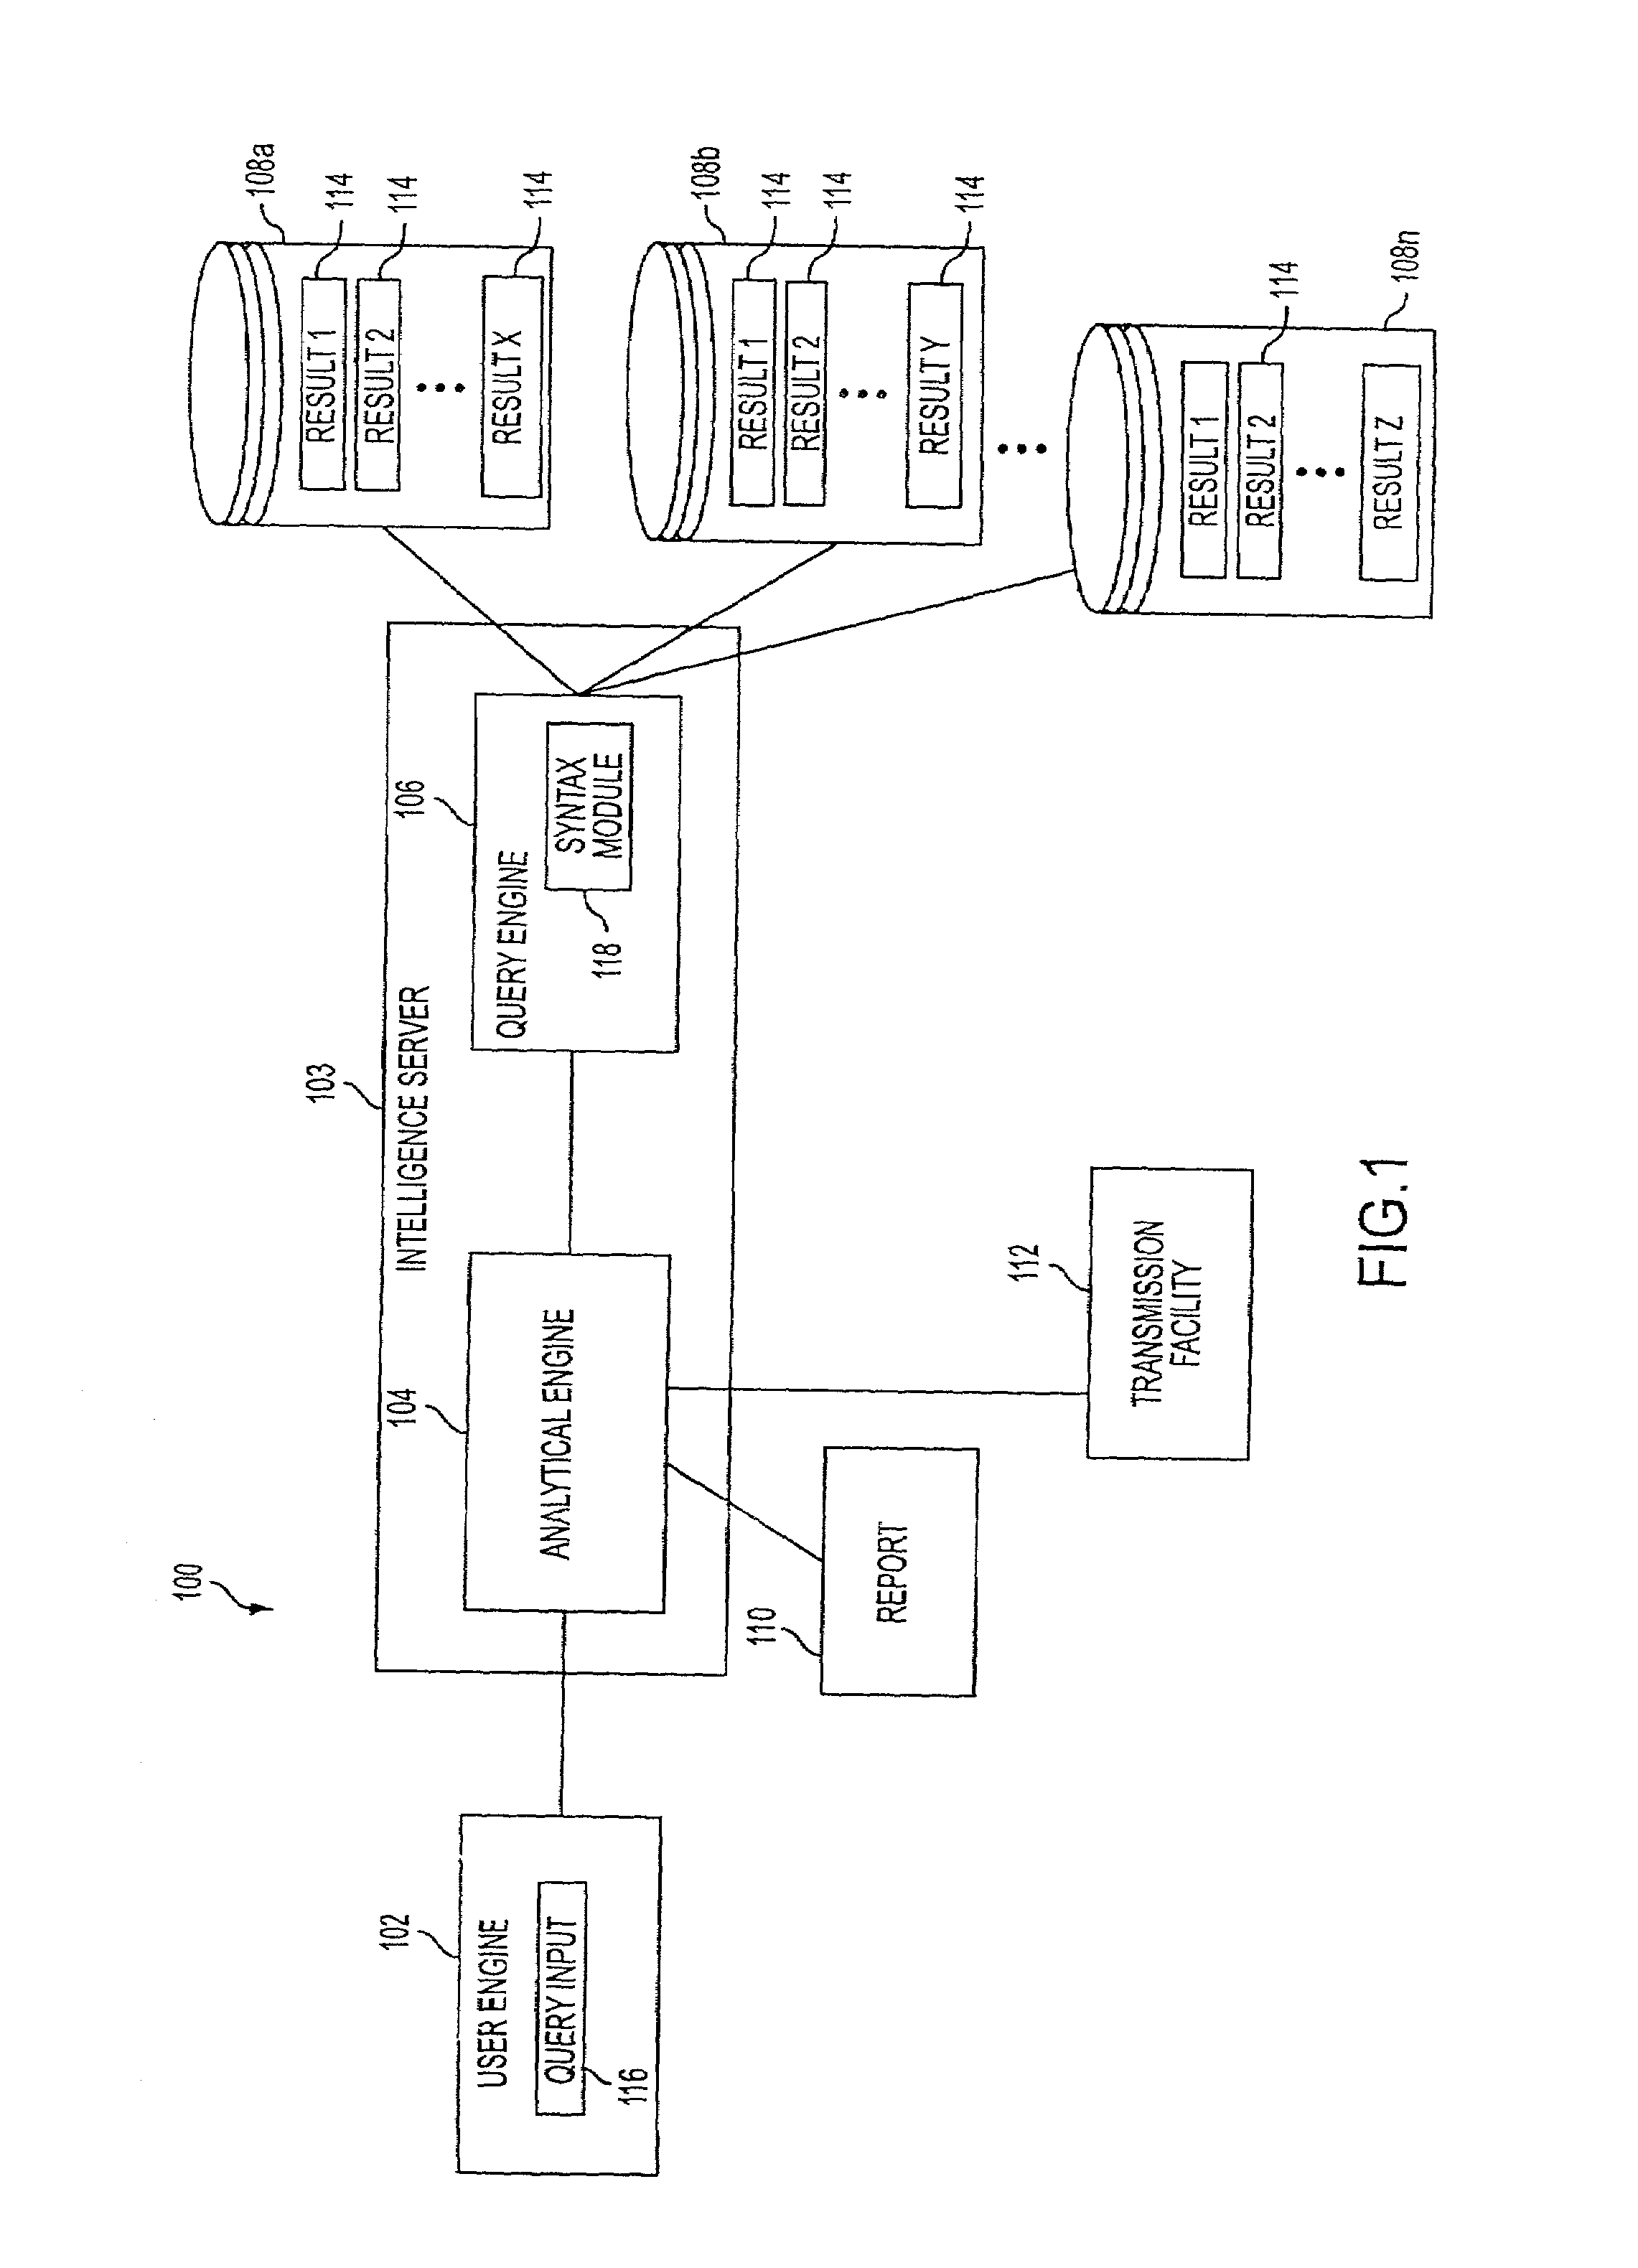 Systems and methods for custom grouping of data